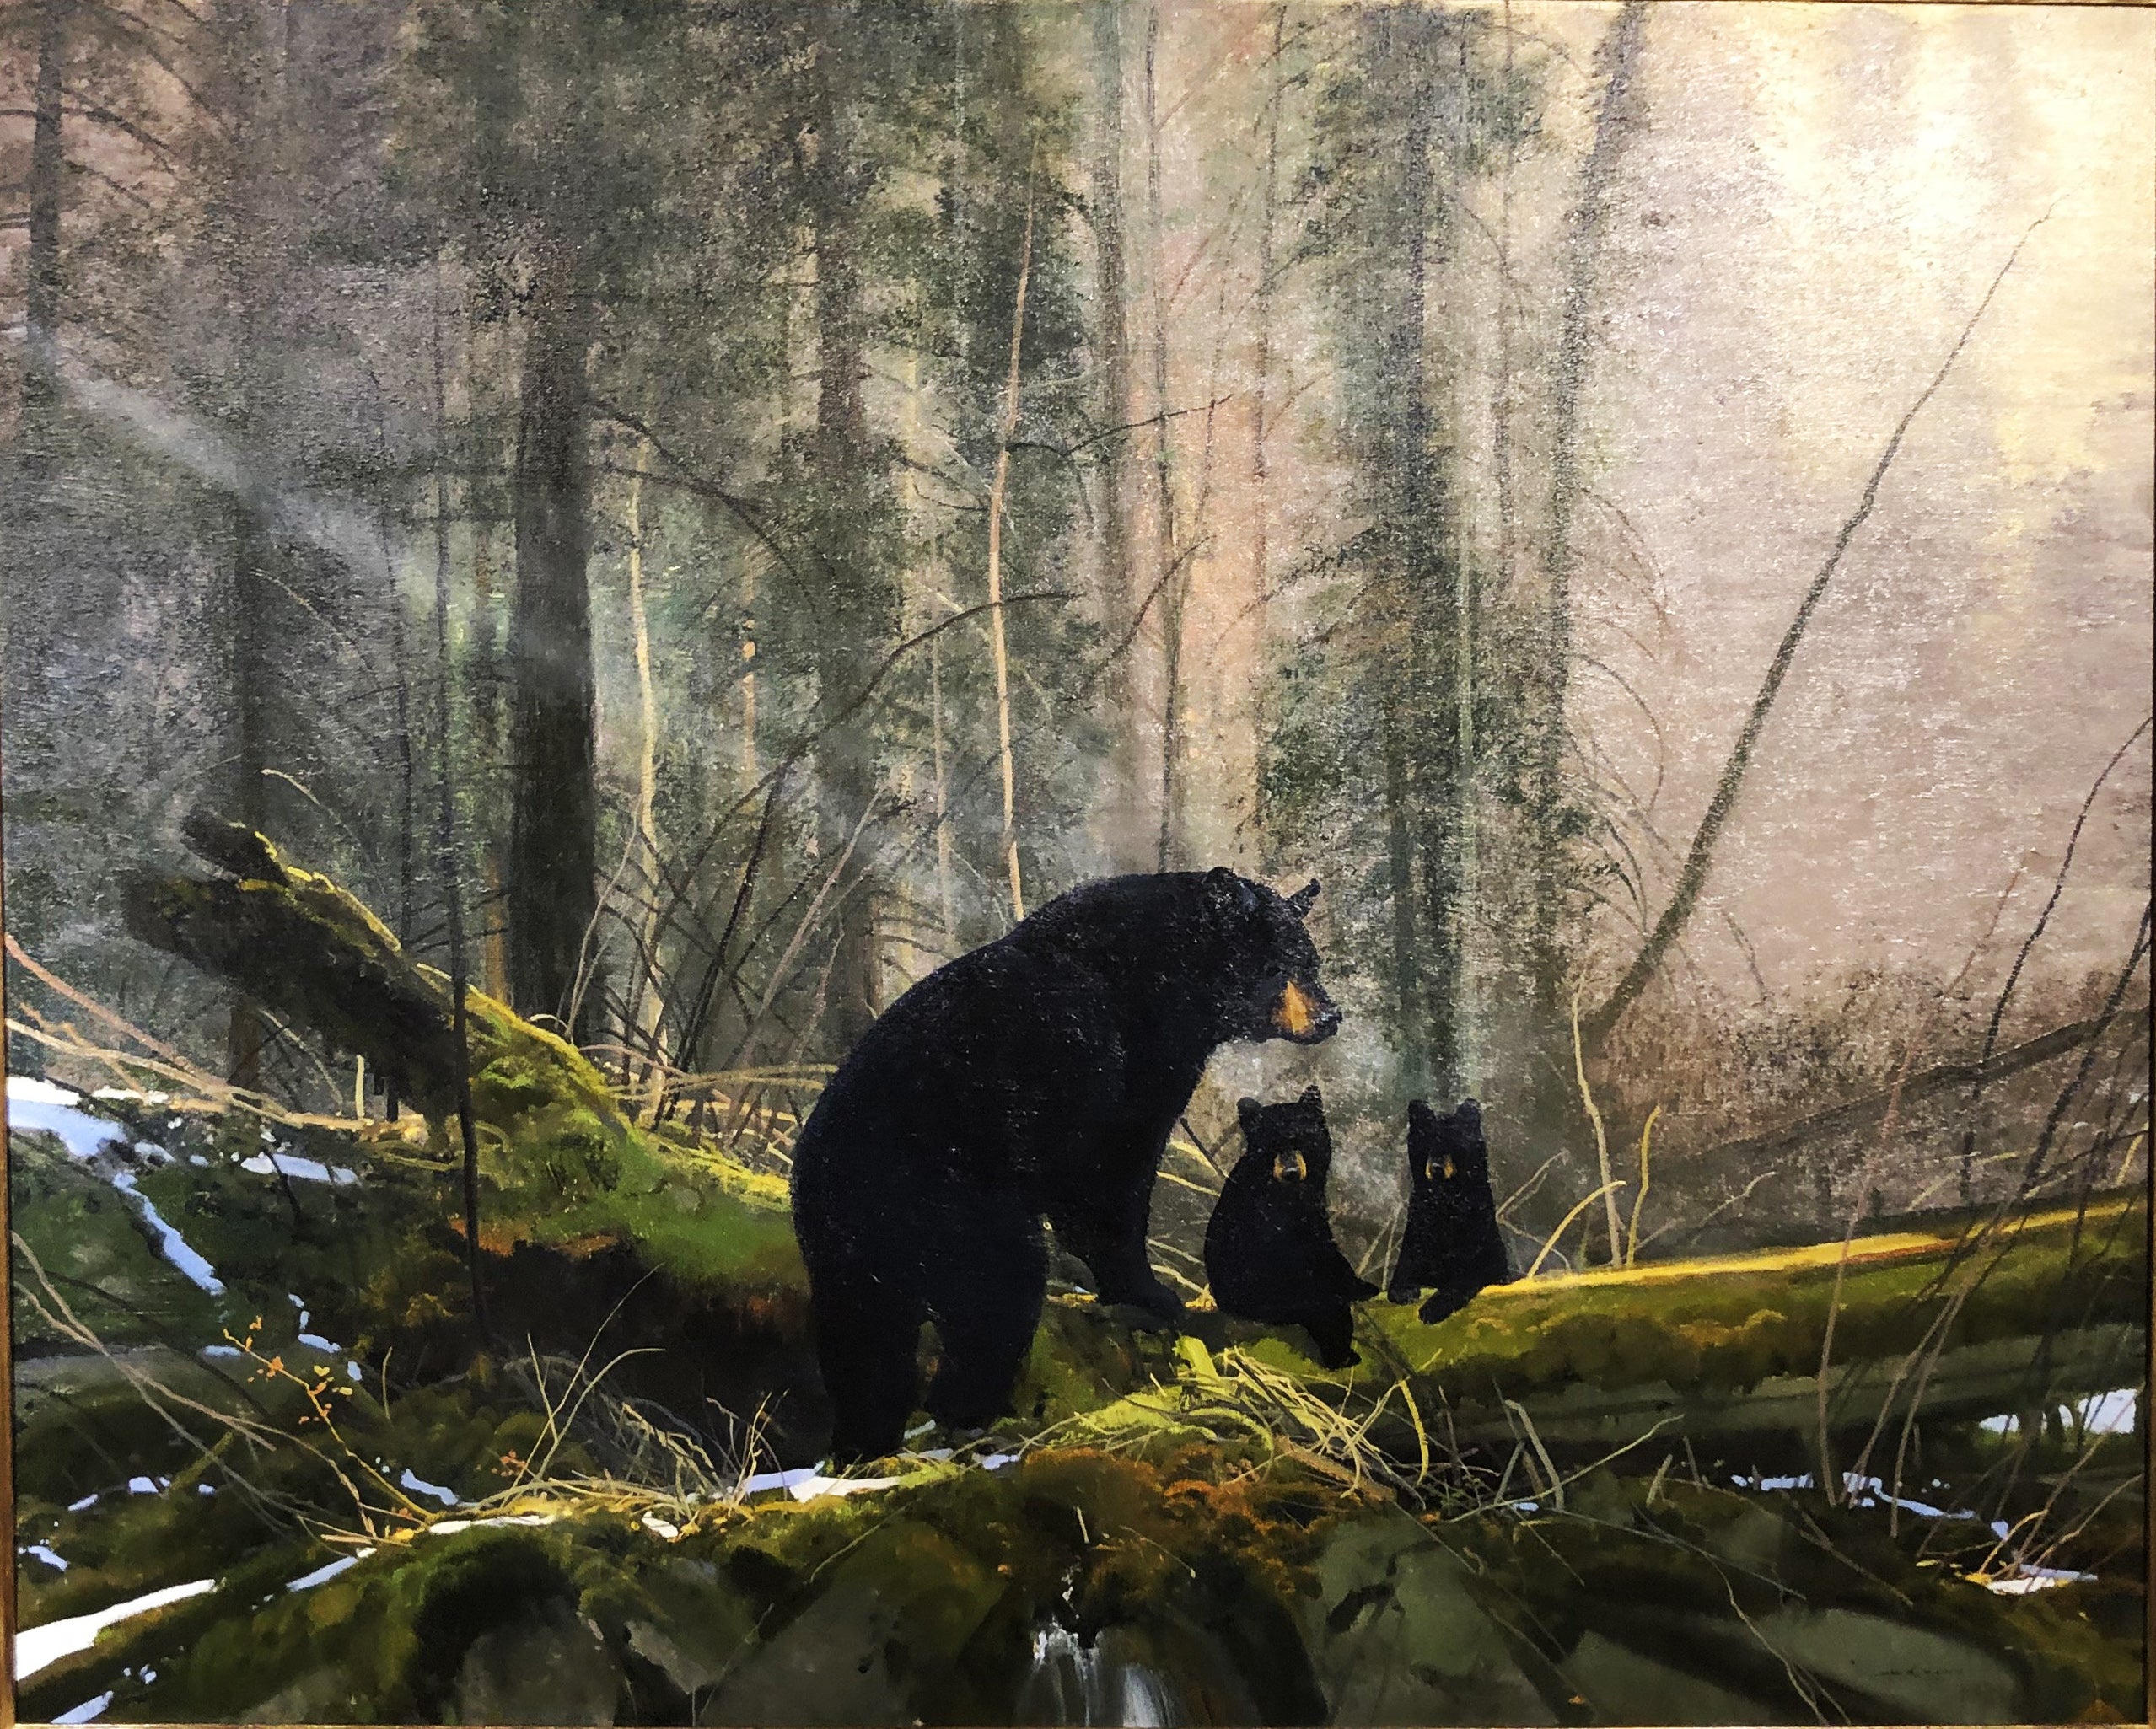 "Bears" by Michael Coleman